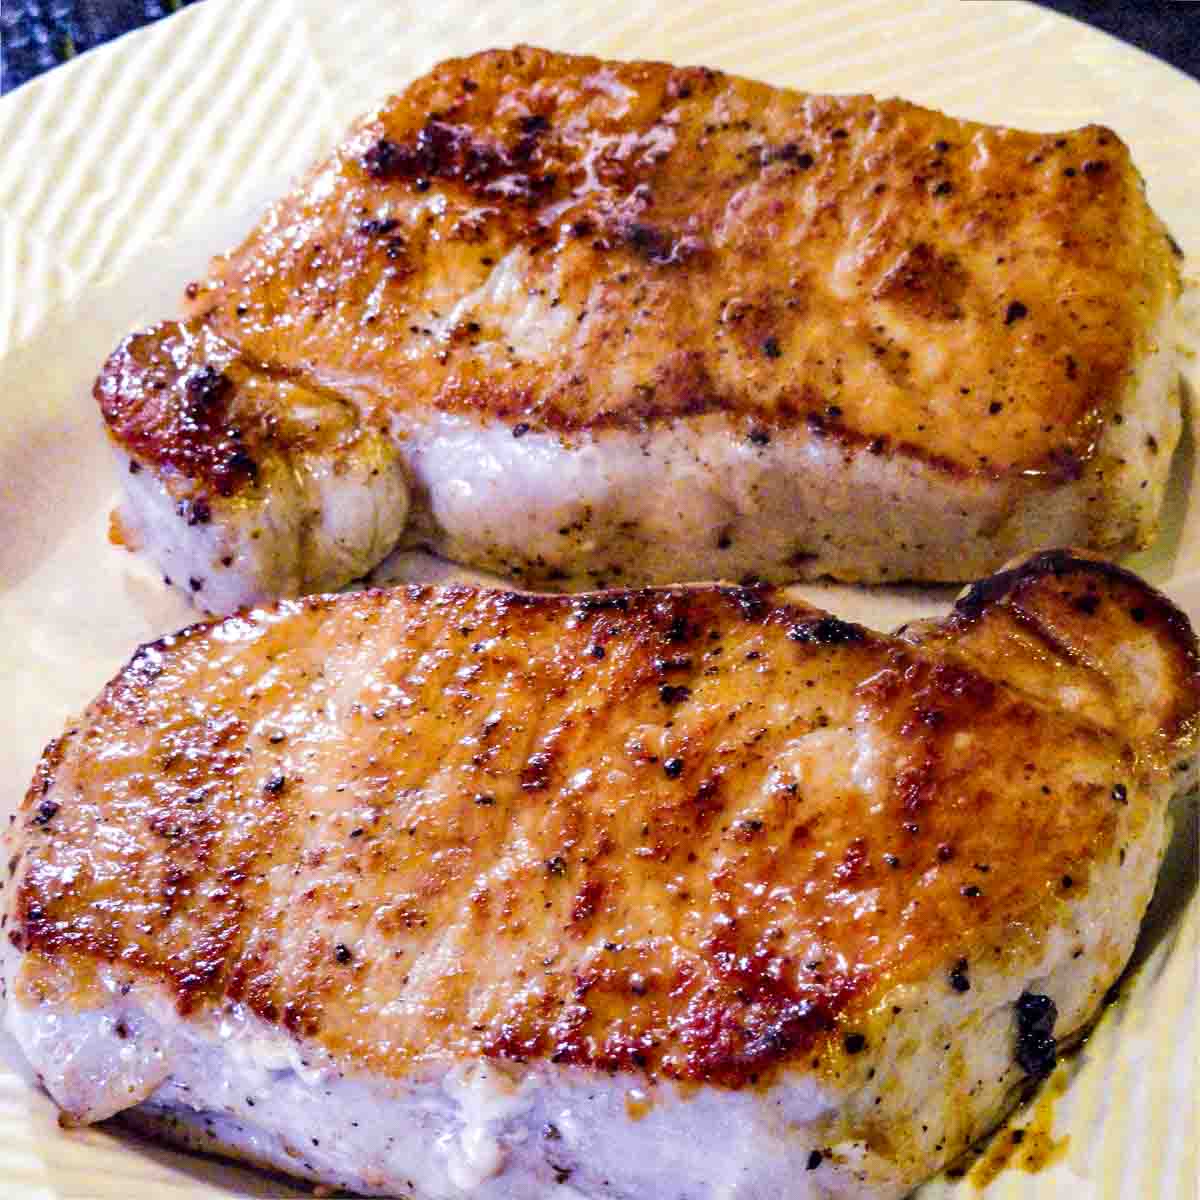 https://www.101cookingfortwo.com/wp-content/uploads/2018/08/Pan-Seared-Oven-Roasted-Pork-Chops-from-Loin-4.jpg